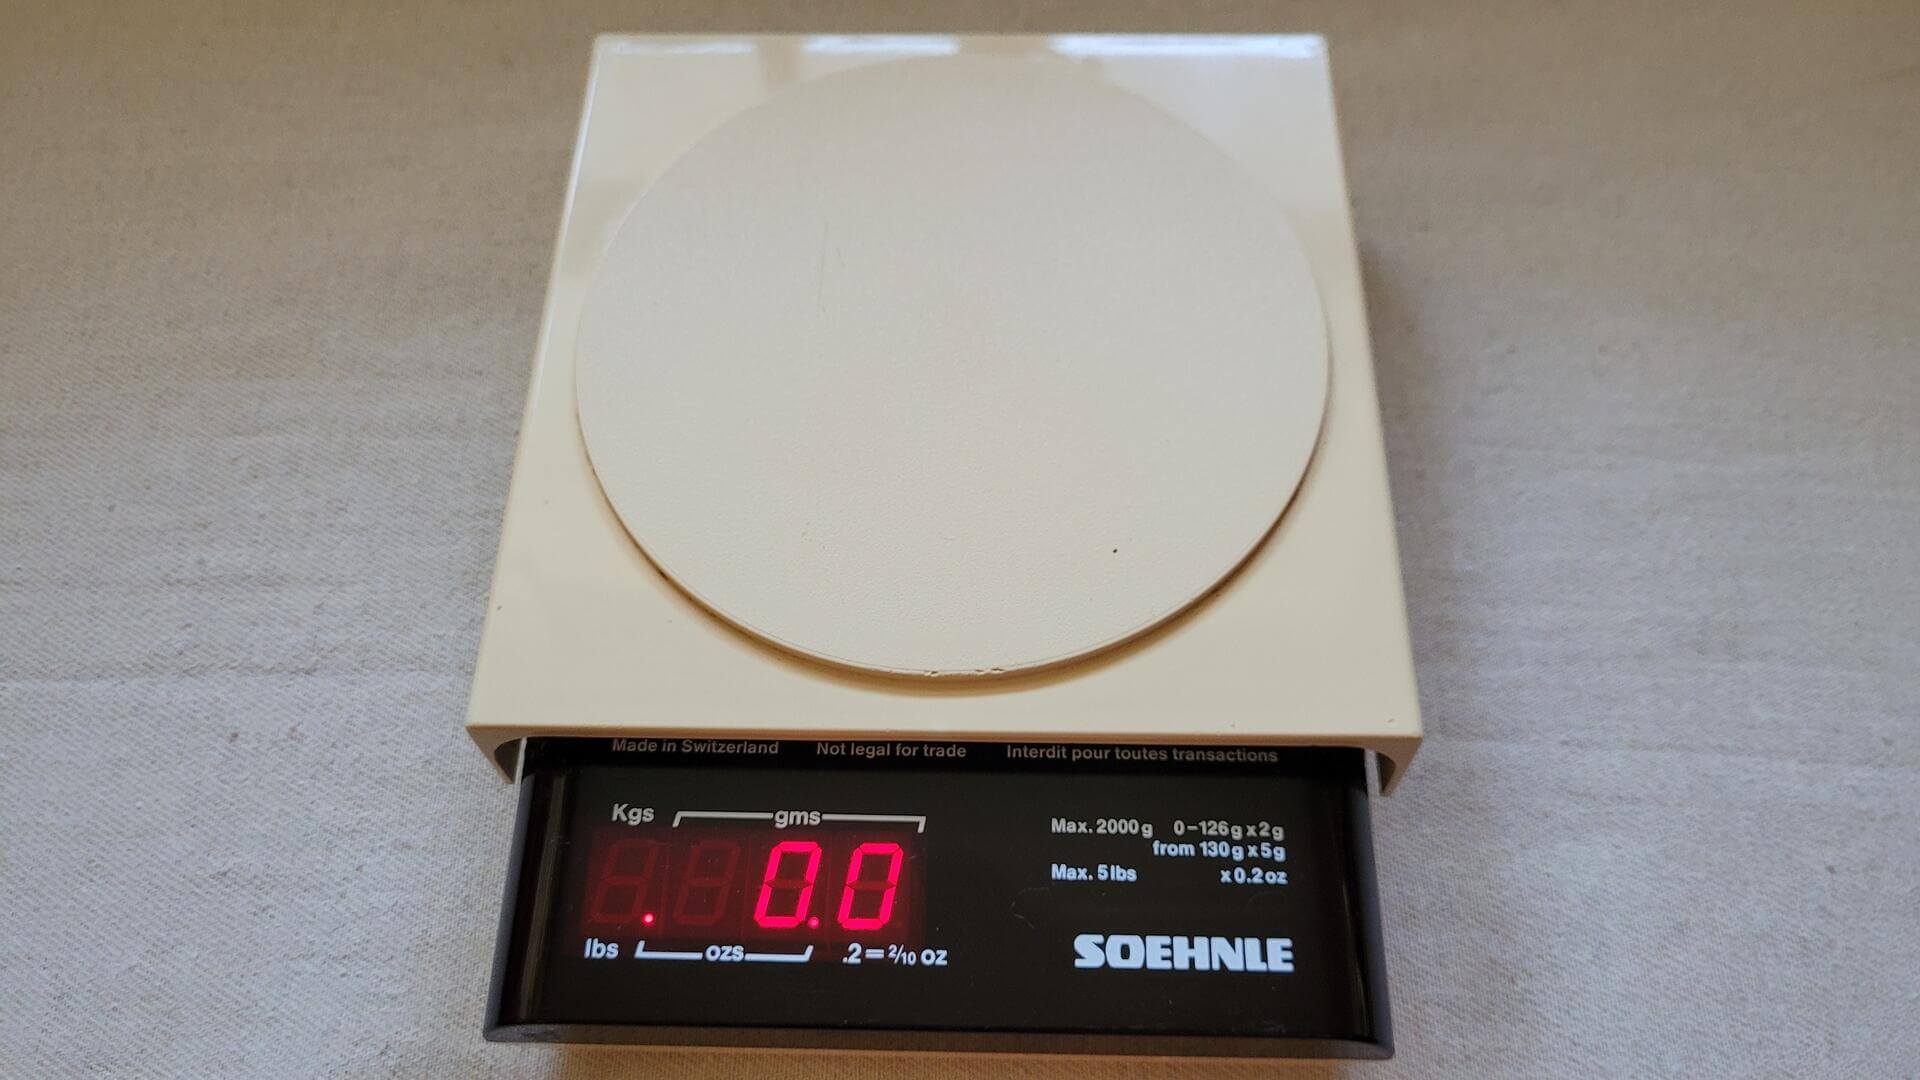 soehnle-industrial-solutions-2000g-5lb-lcd-kitchen-scale-made-in-switzerland-vintage-retro-design-measuring-digital-tools-and-kitchenware